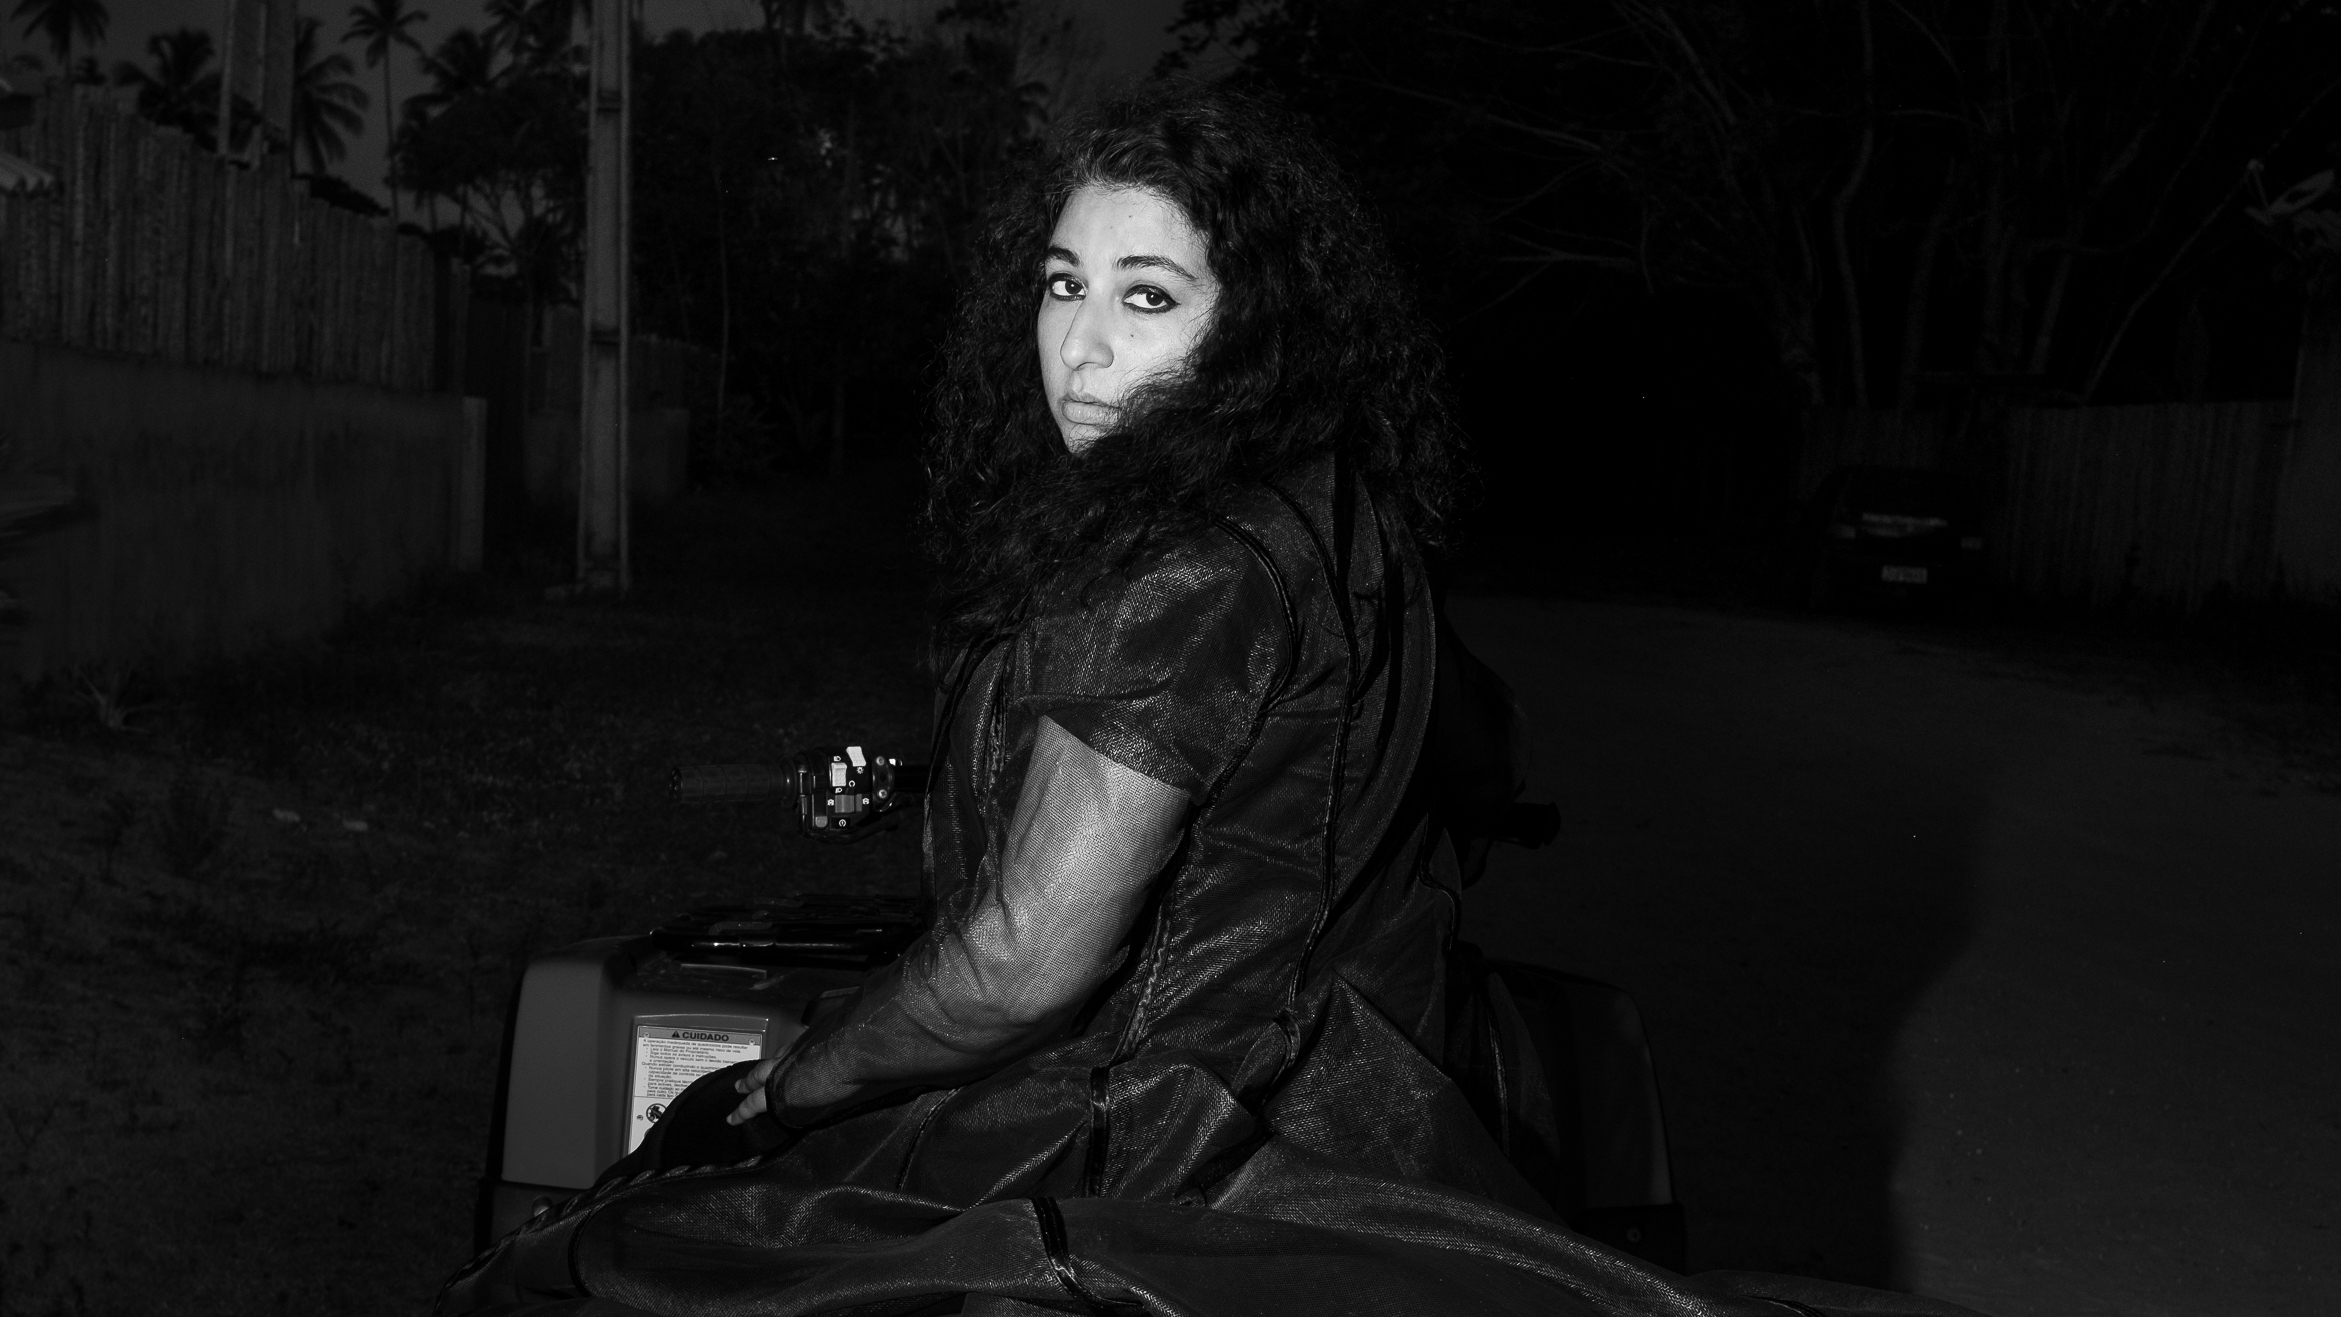 Black and white photo of the artist Arooj Aftab, also a curator for Le Guess Who?, sitting on a motorcycle and looking over her shoulder into the camera